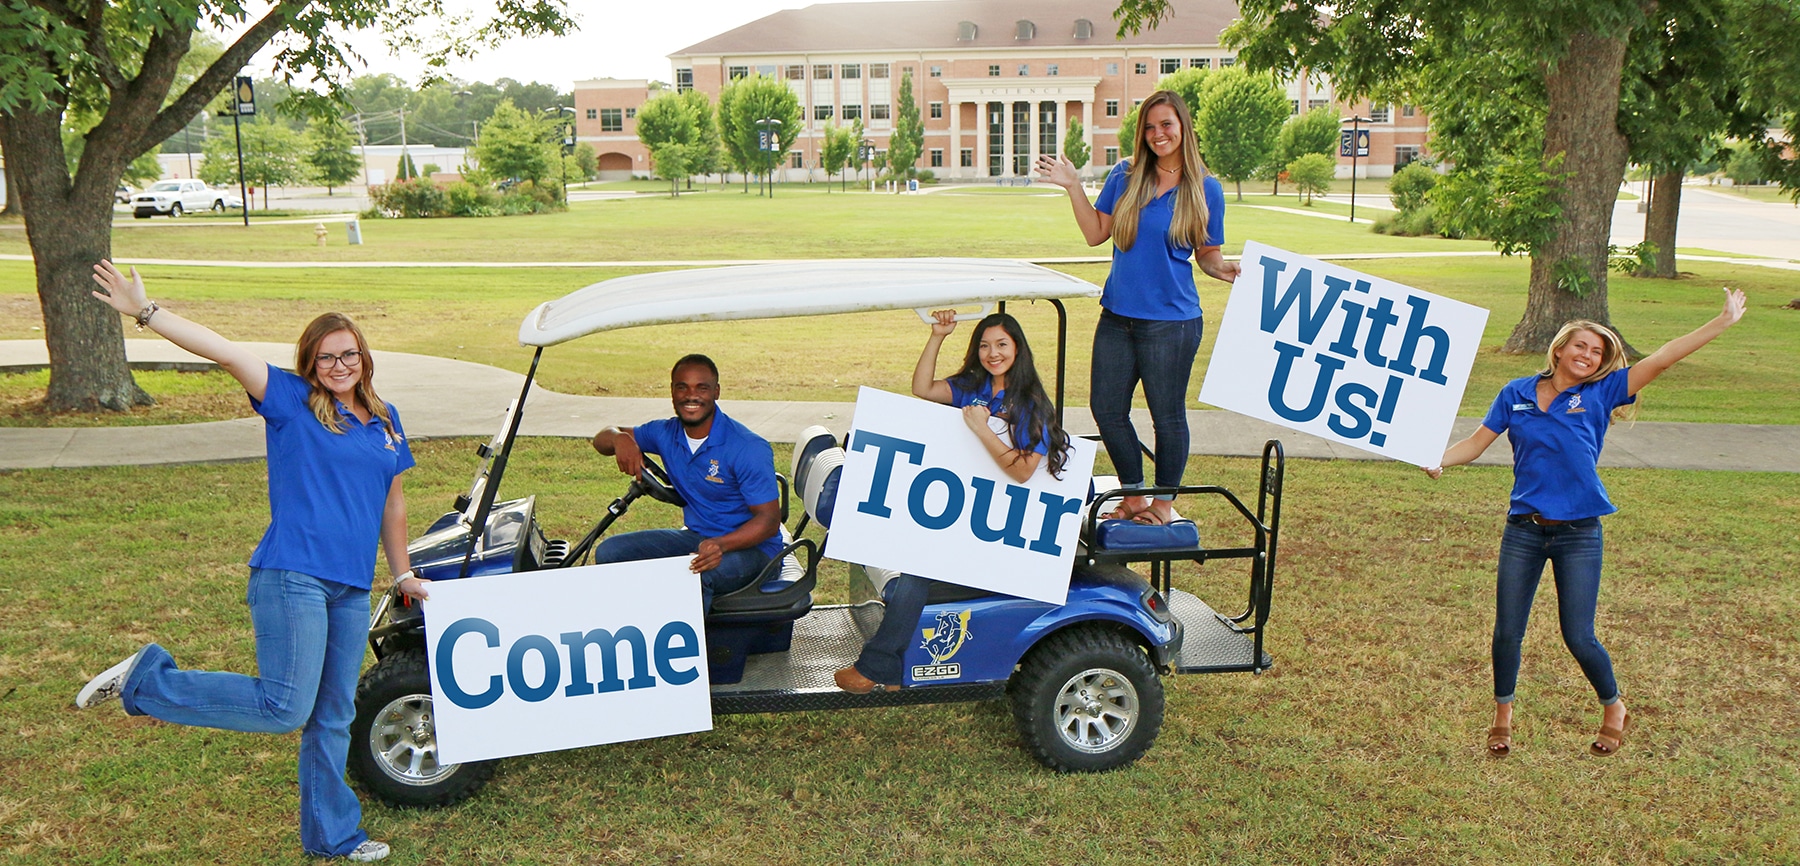 What Are Good Questions To Ask On A College Tour